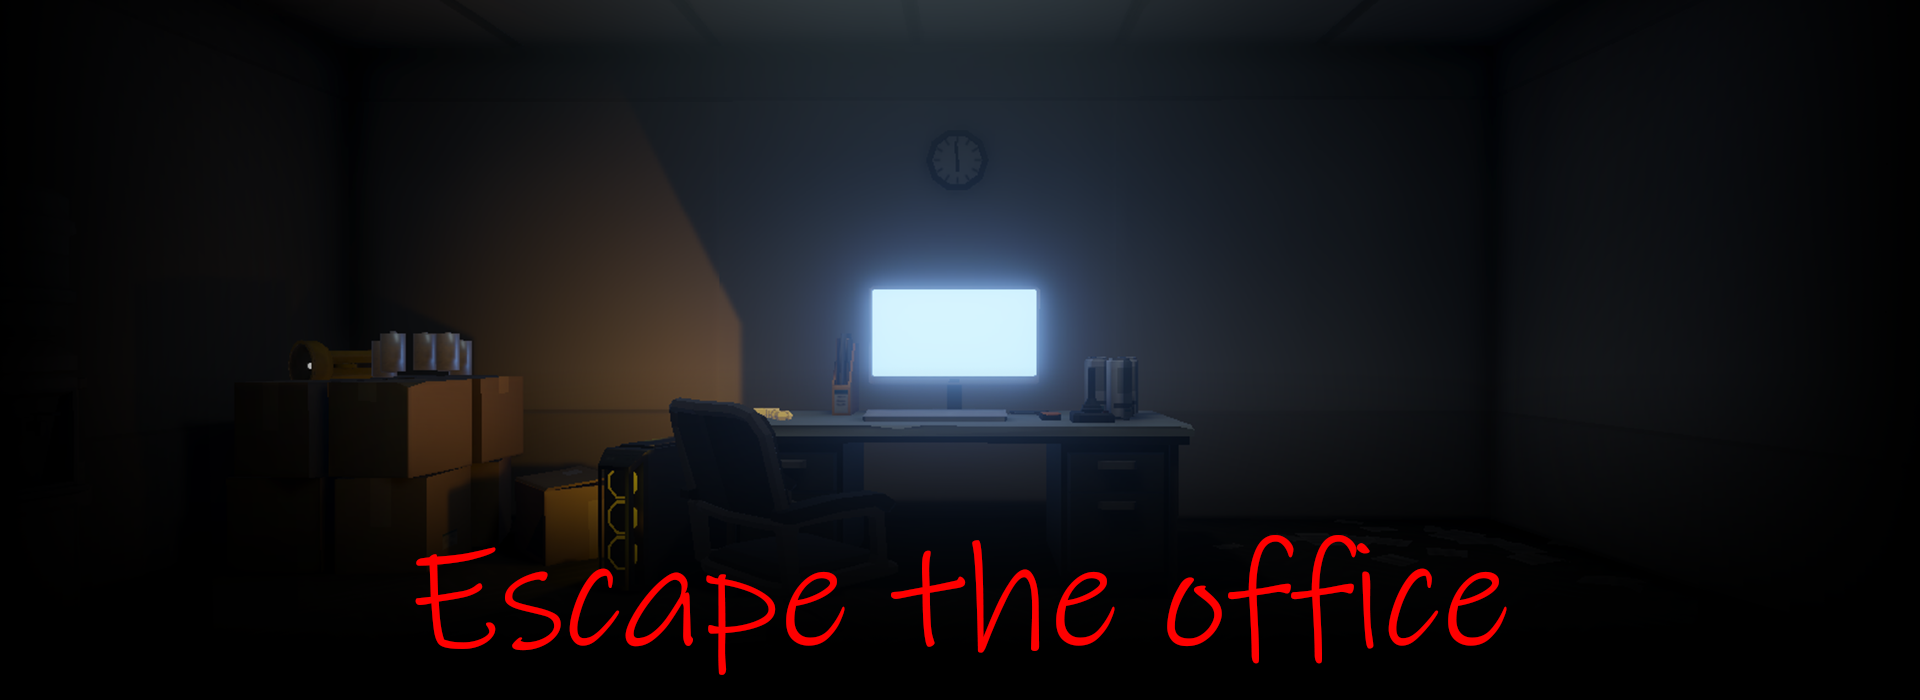 Escape the office 逃離辦公室